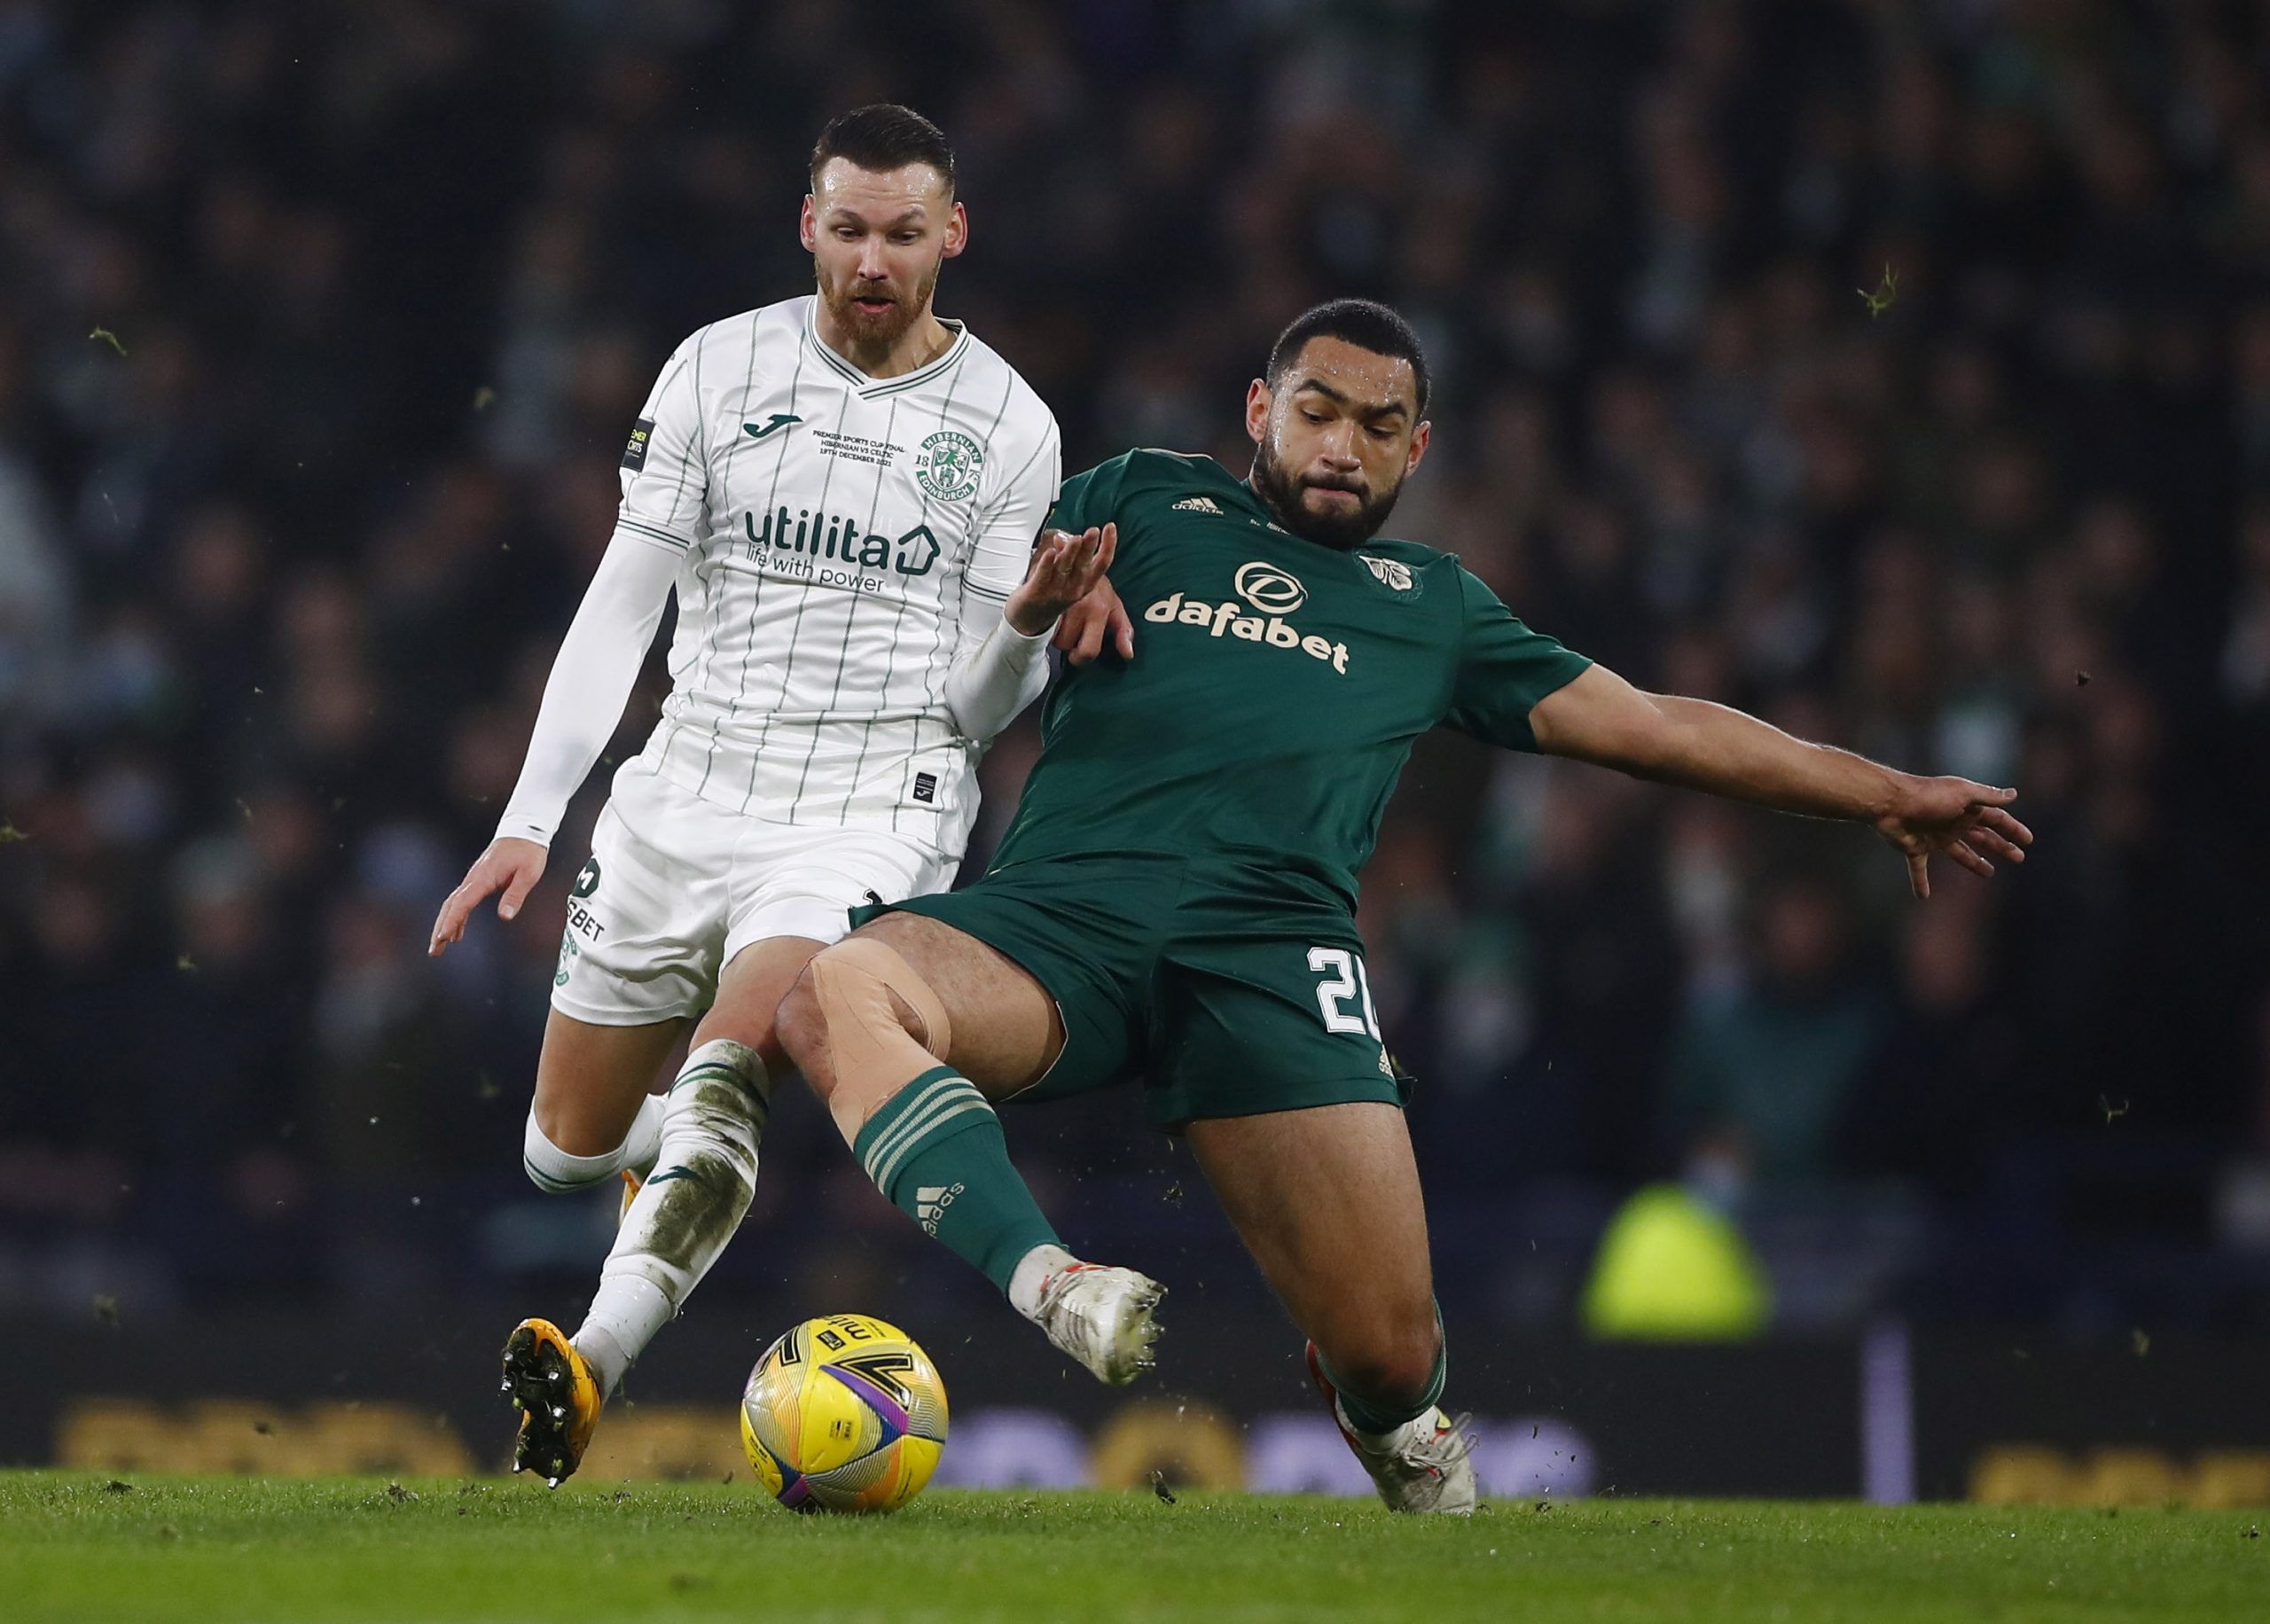 Celtic: Journalist shares promising Cameron Carter-Vickers update -Follow up